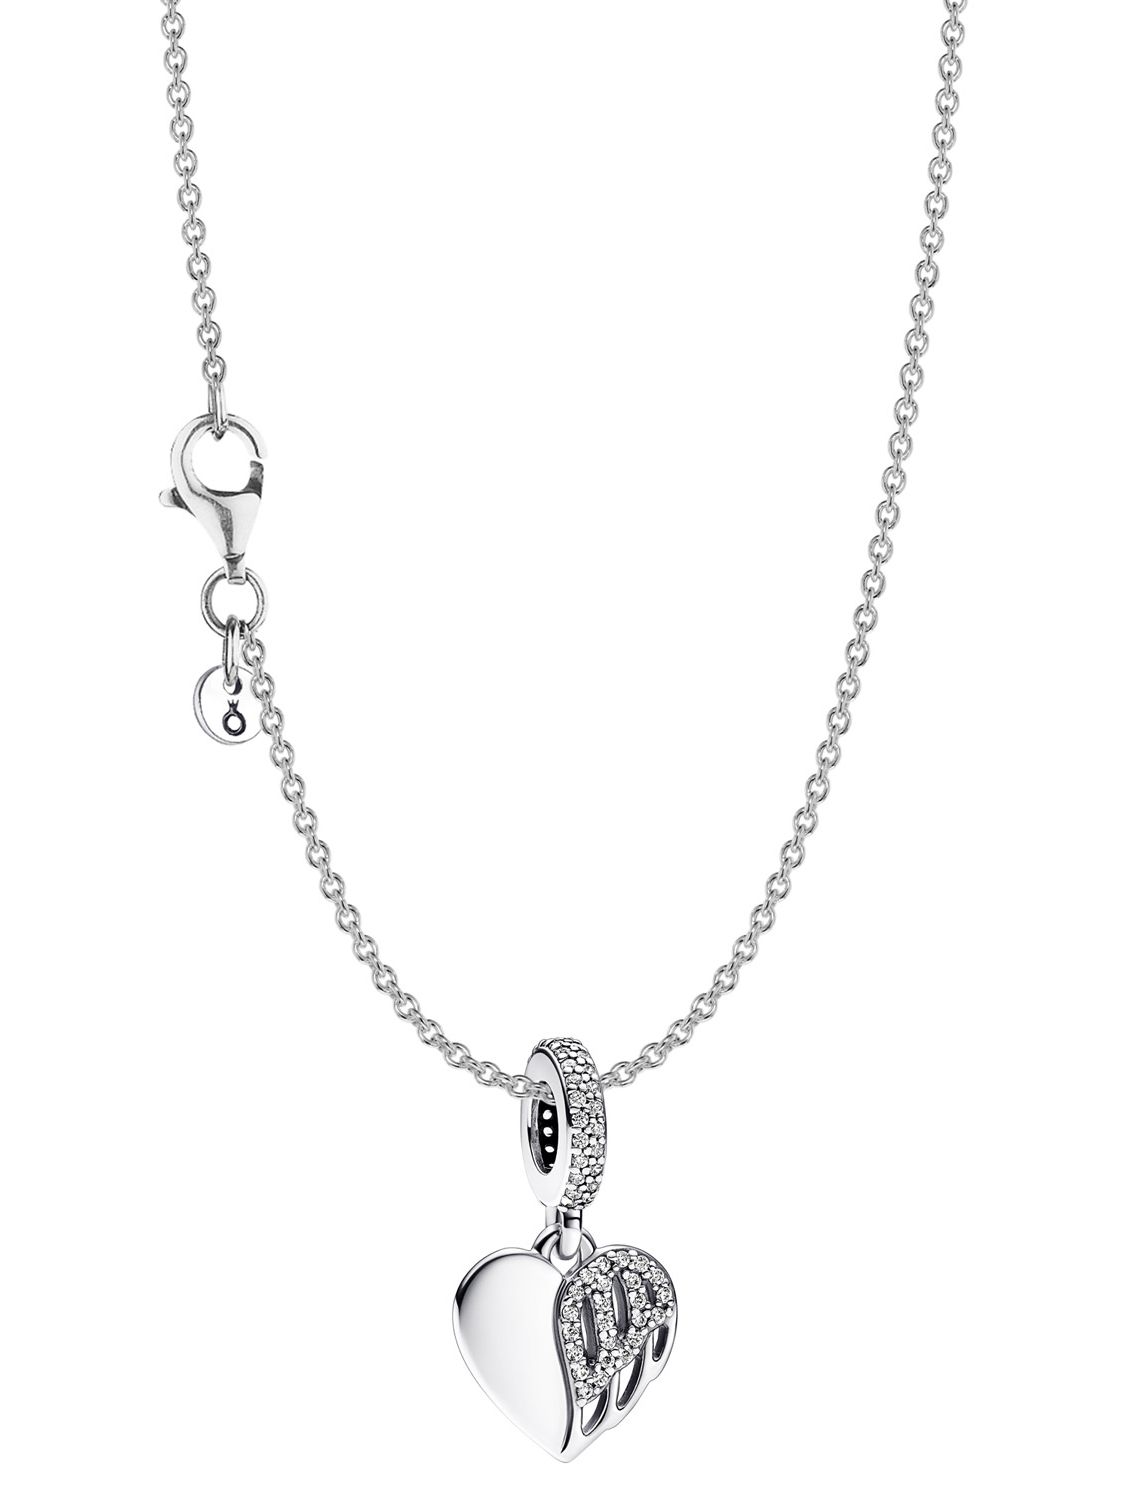 PANDORA Heart Necklace For Ladies, Sterling Silver With Cubic Zirconia  391229C01-45